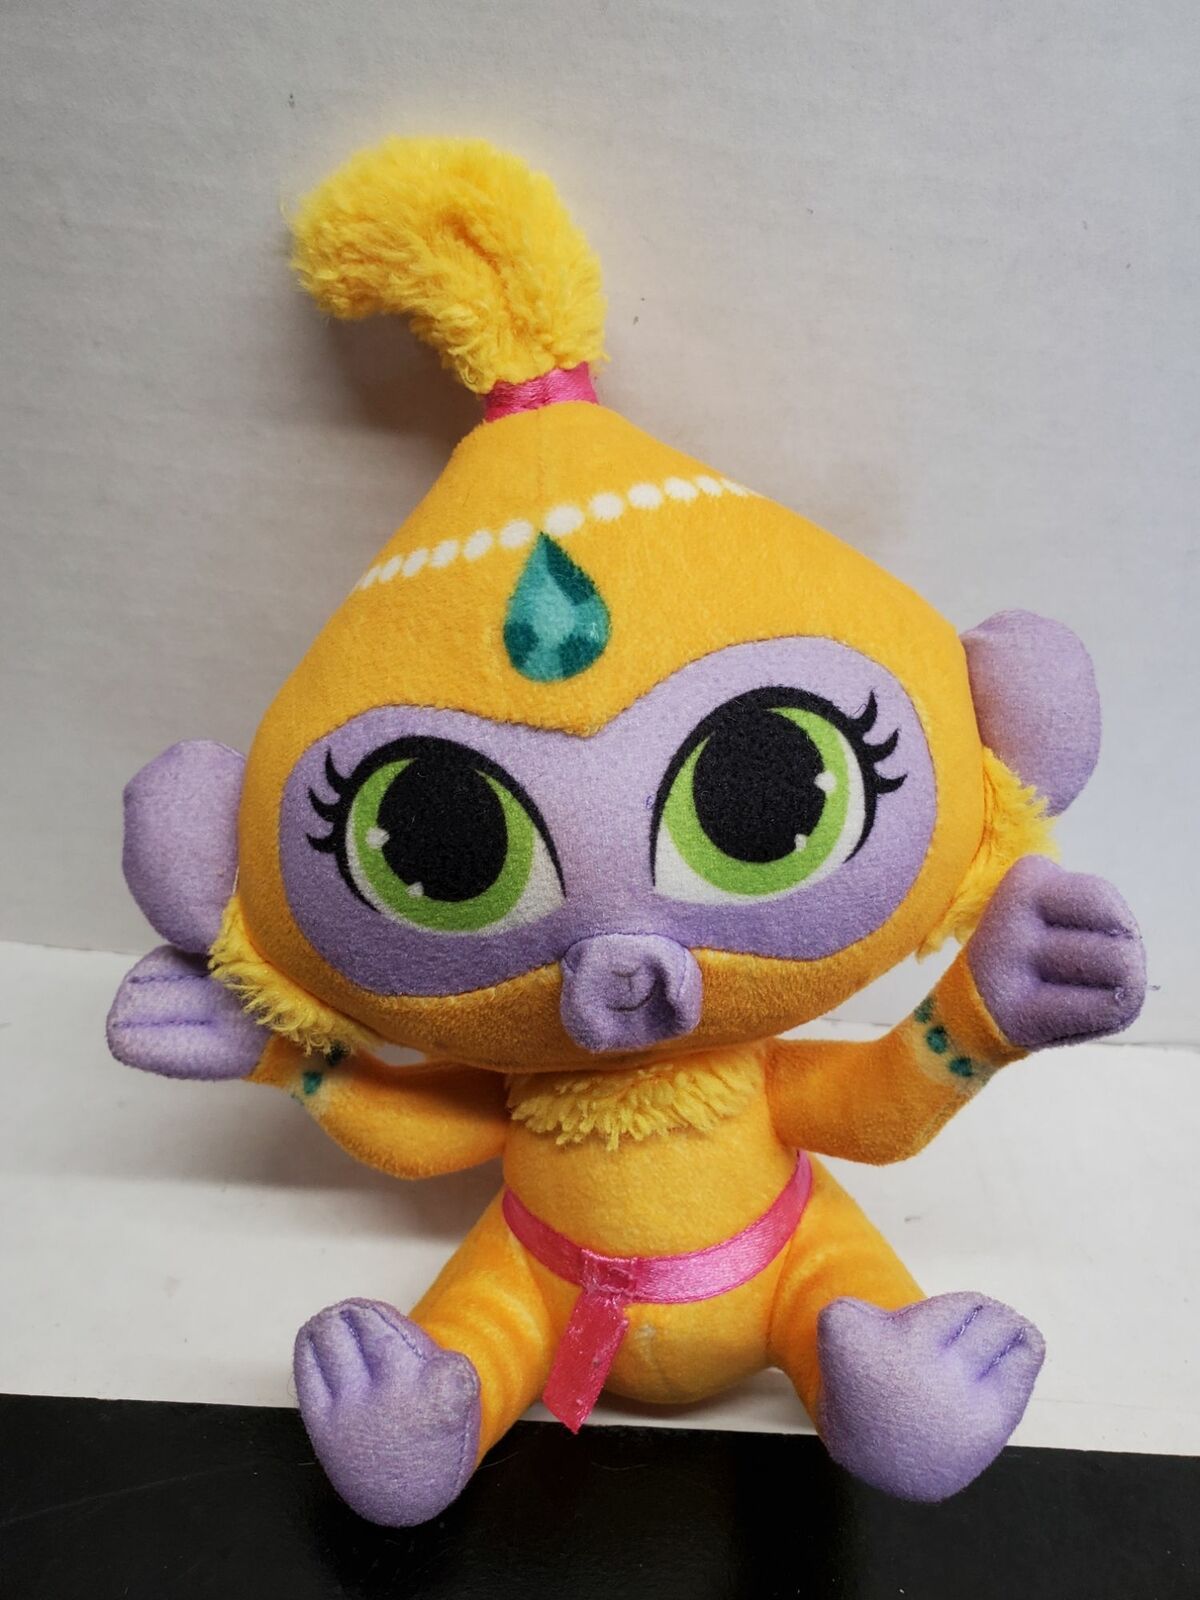 Primary image for 9 Inch 2010 Viacom Nickelodeon Shimmer and Shine Tala Plush